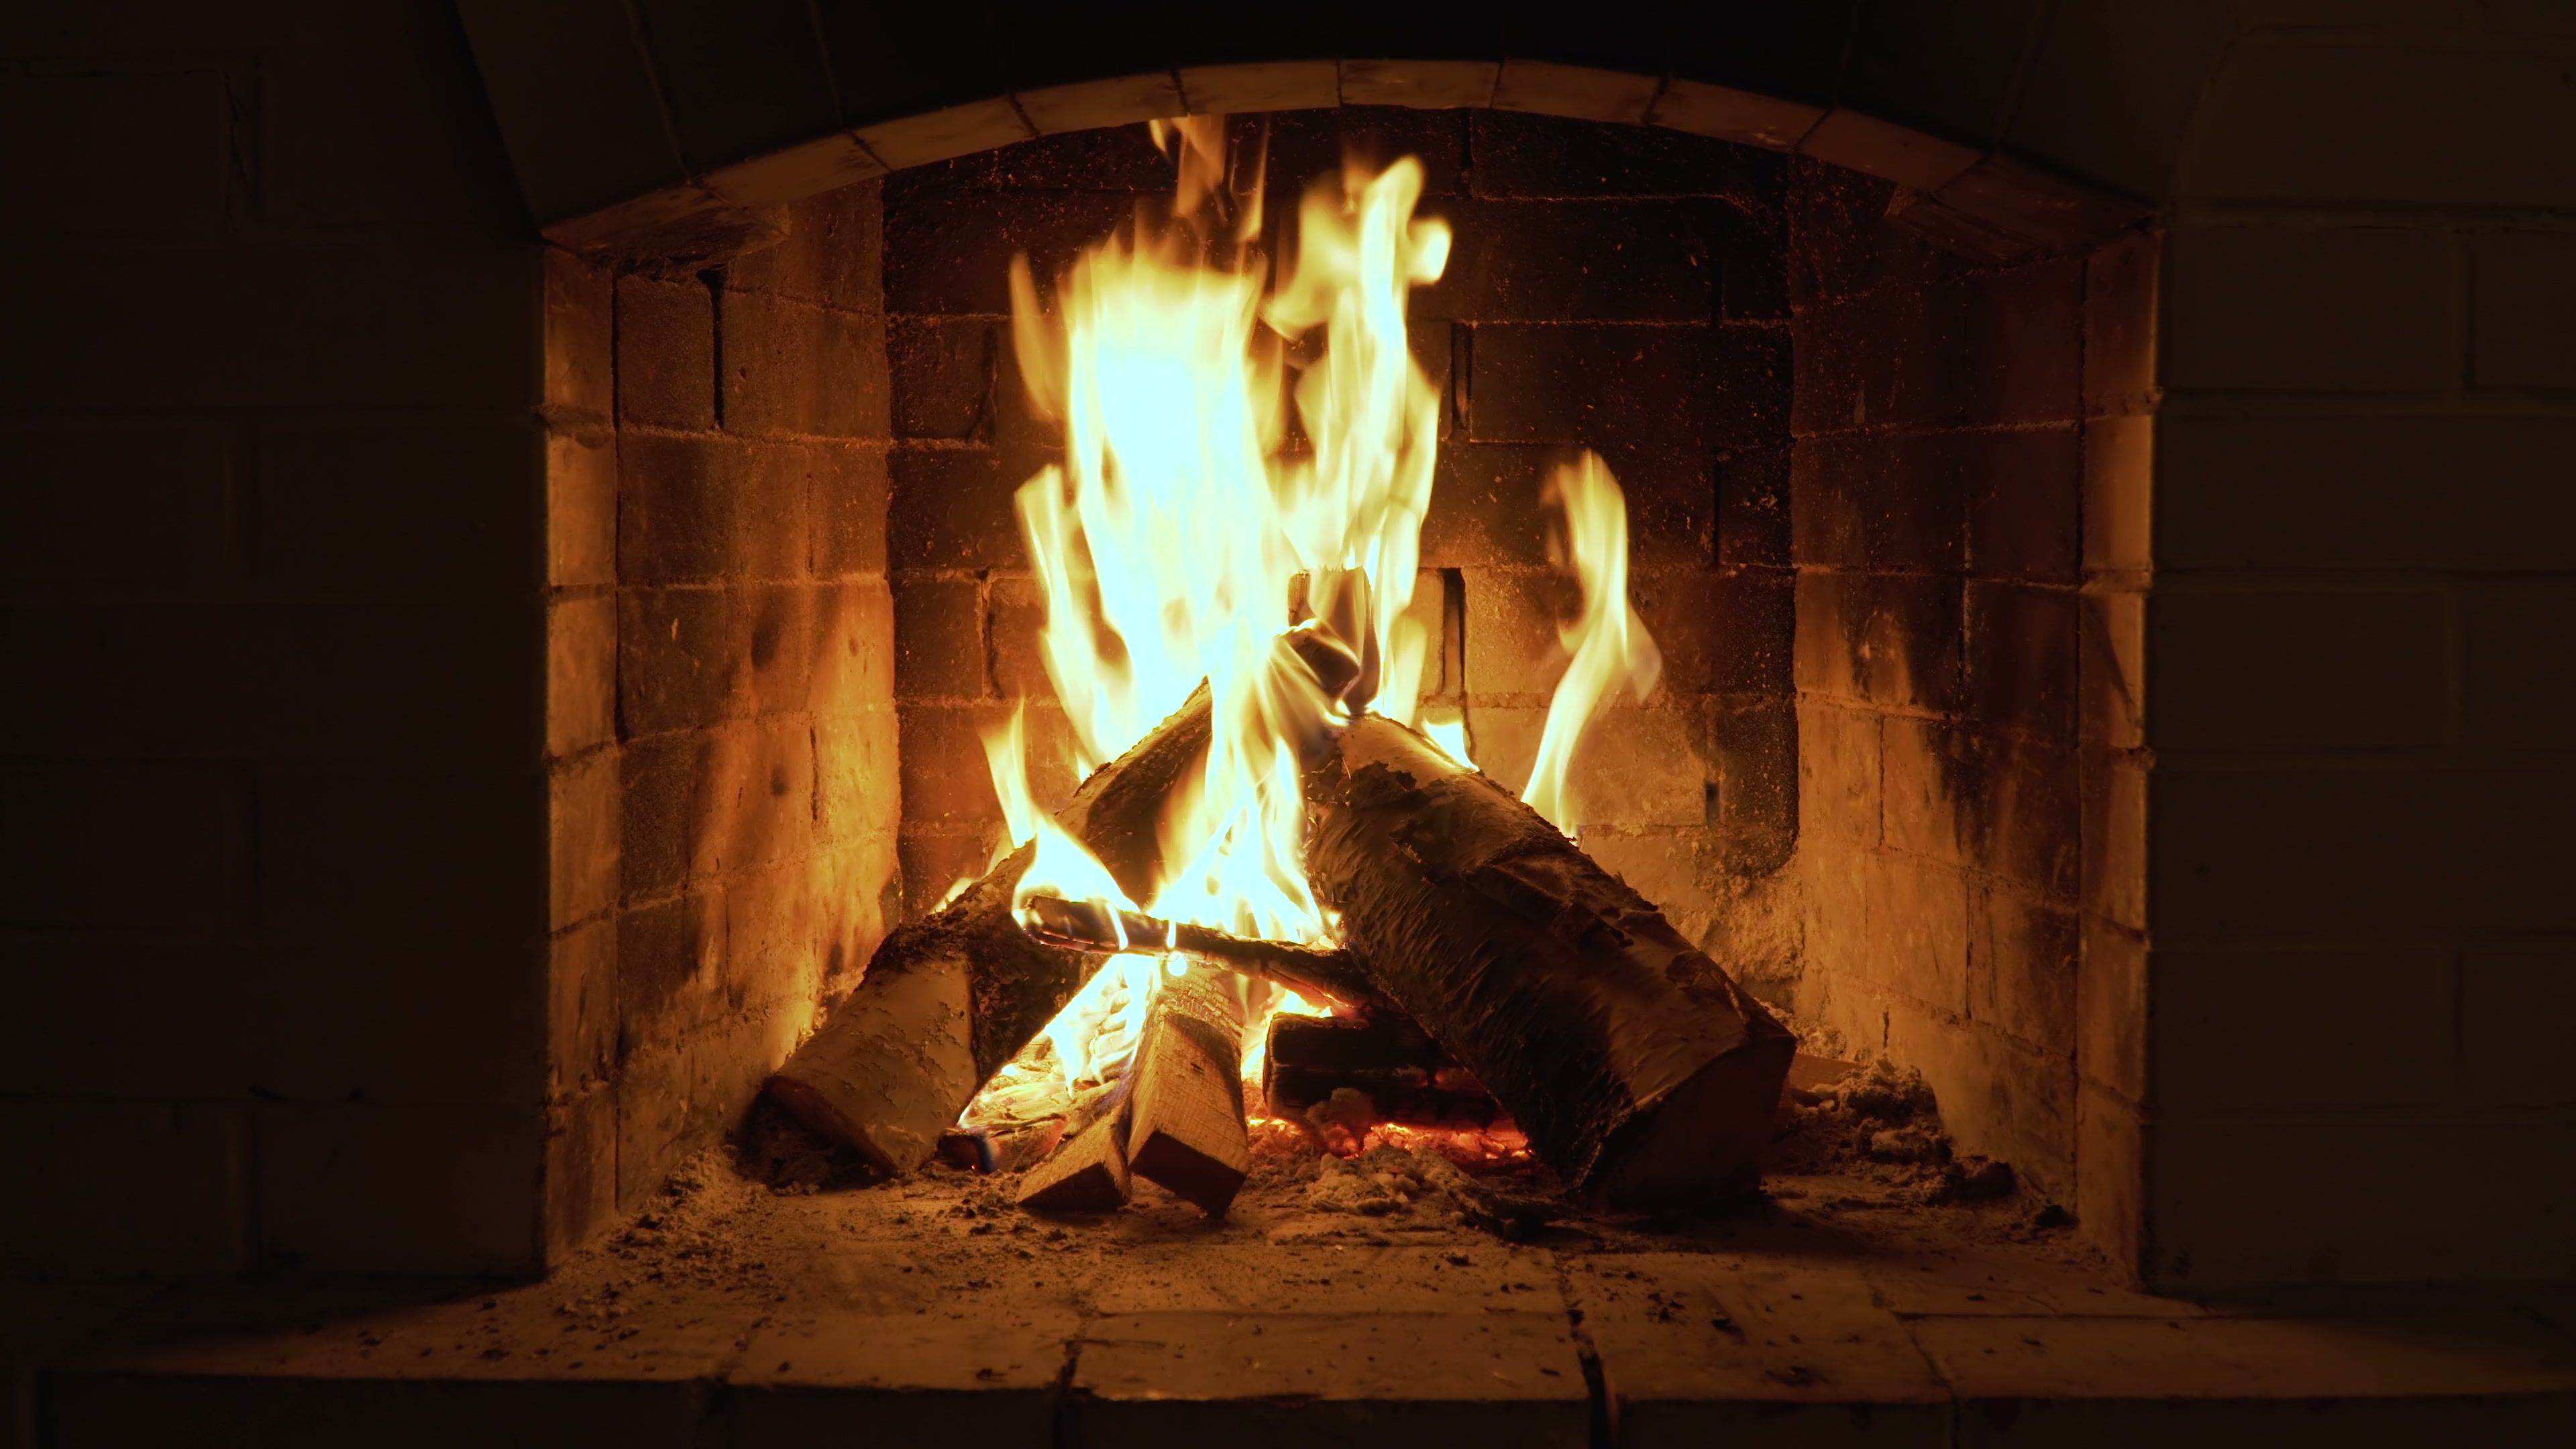 Embers Fireplace Beautiful Burning Fire In the Fireplace Wood and Embers In the